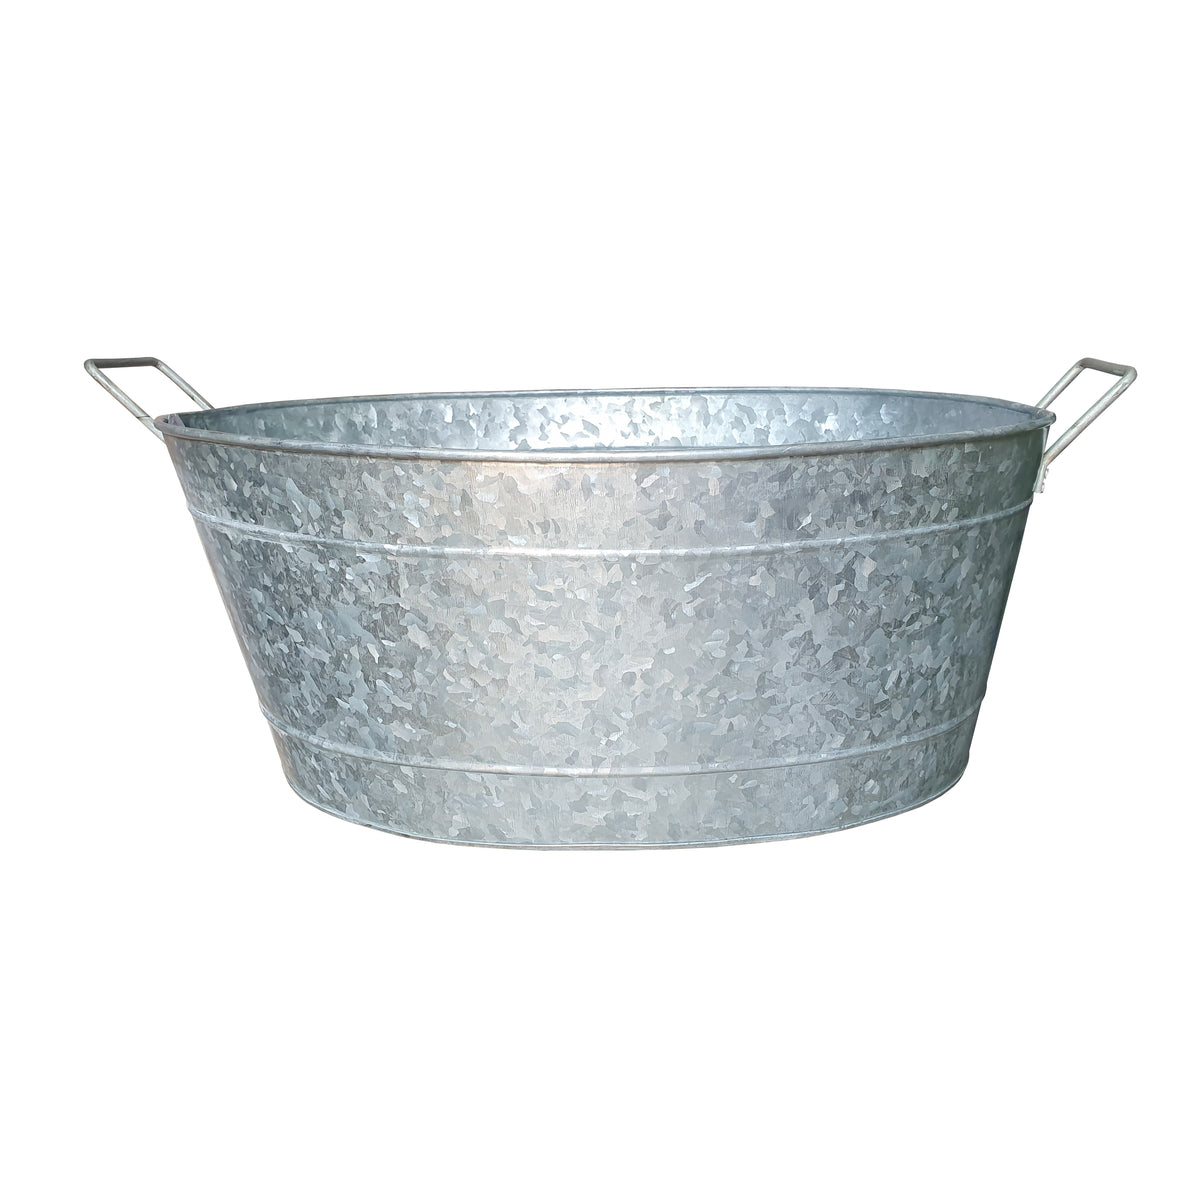 Embossed Design Oval Shape Galvanized Steel Tub with Side Handles, Small, Silver - BM195212